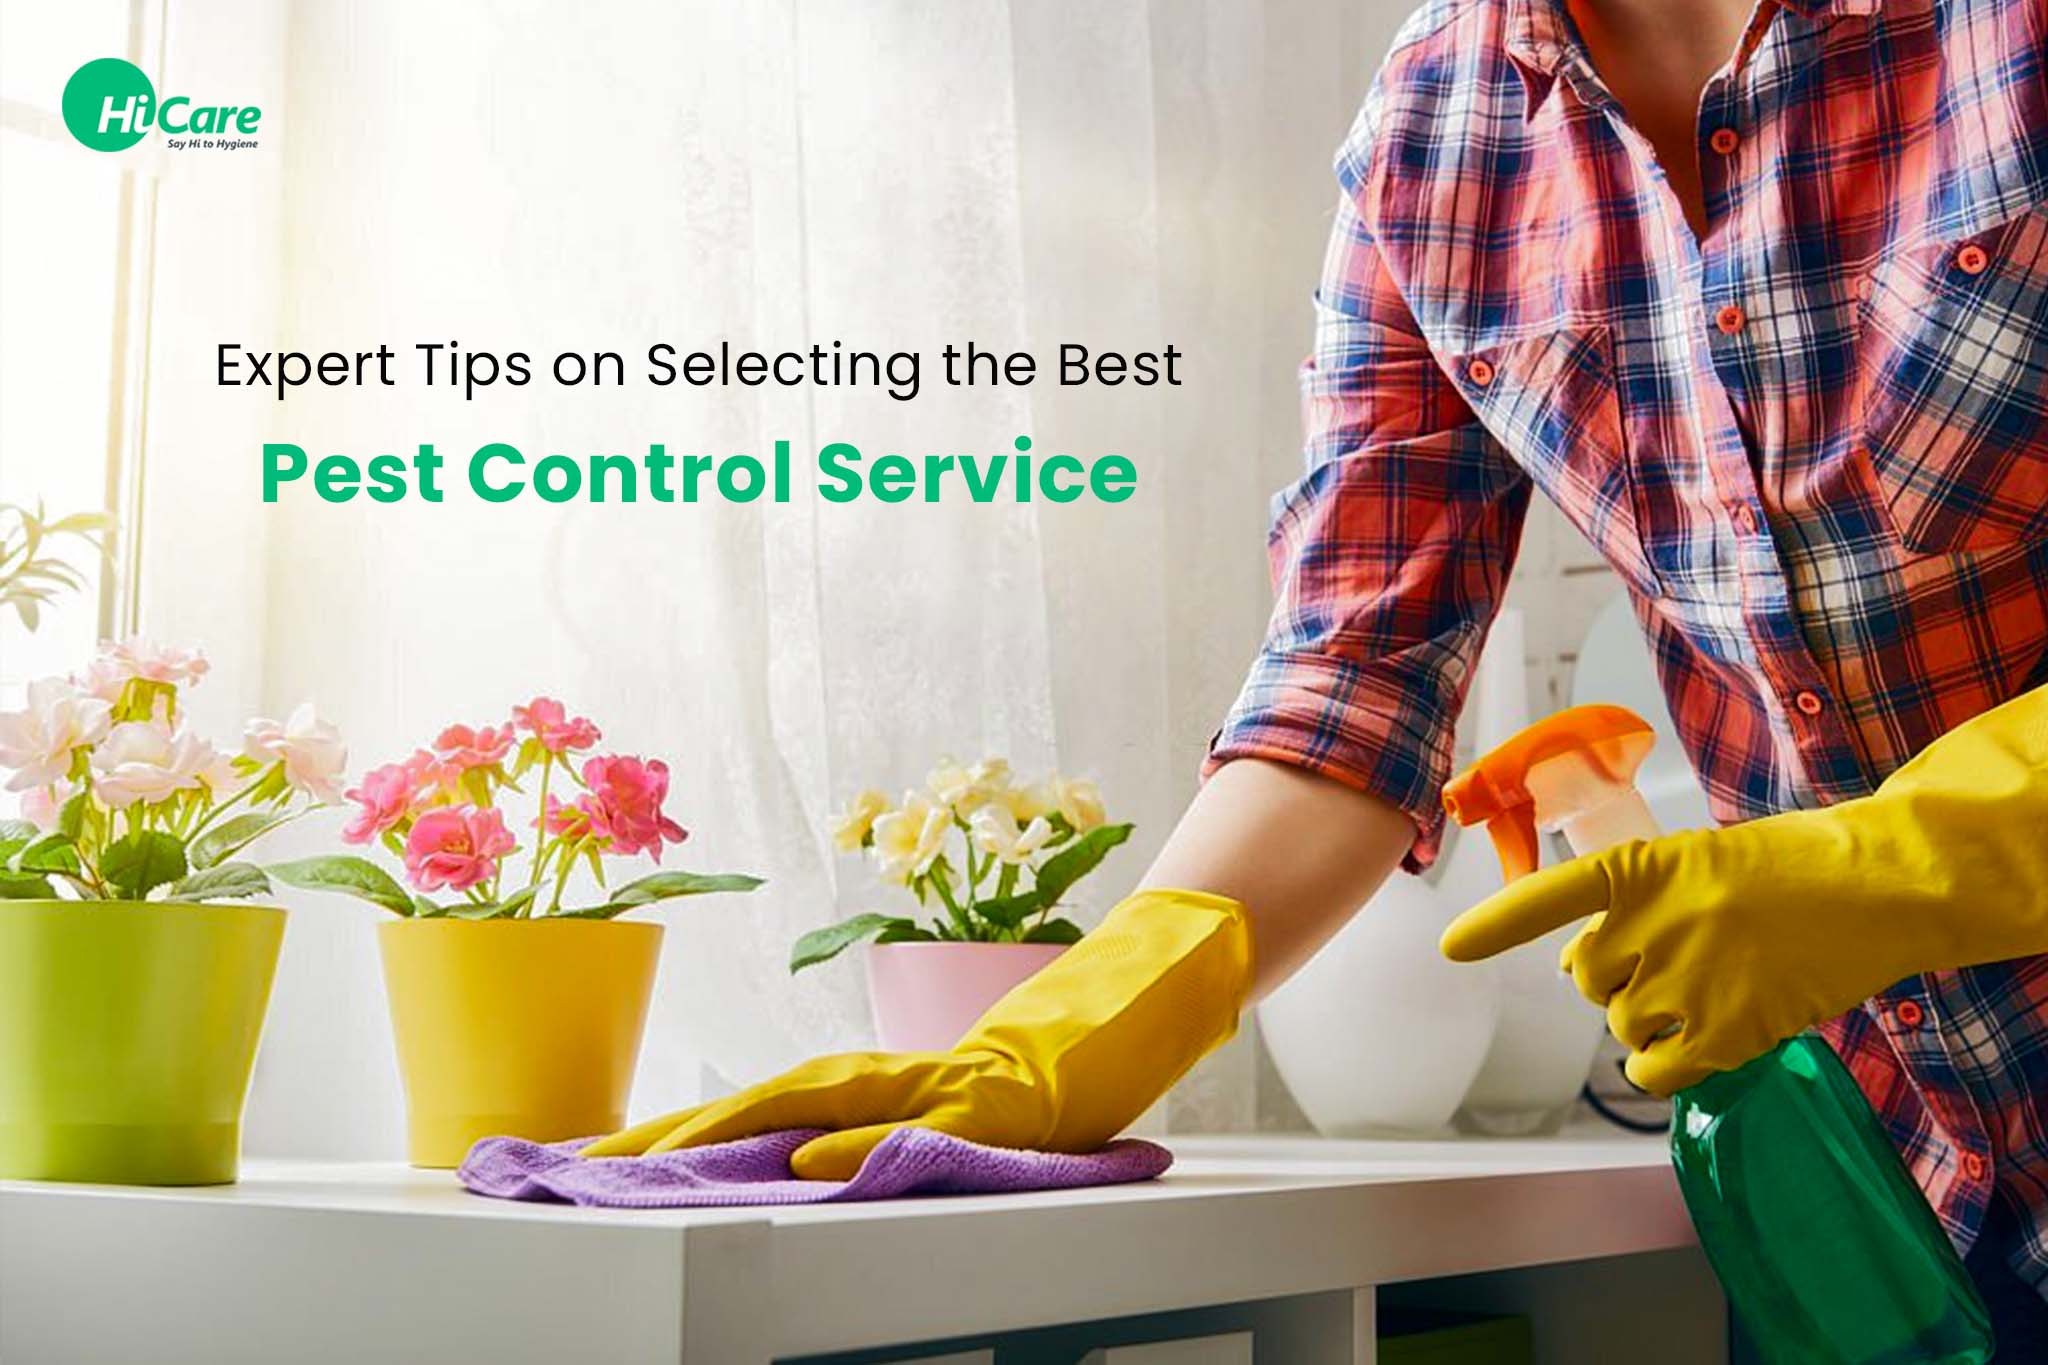 Expert Tips on Selecting the Best Pest Control Service